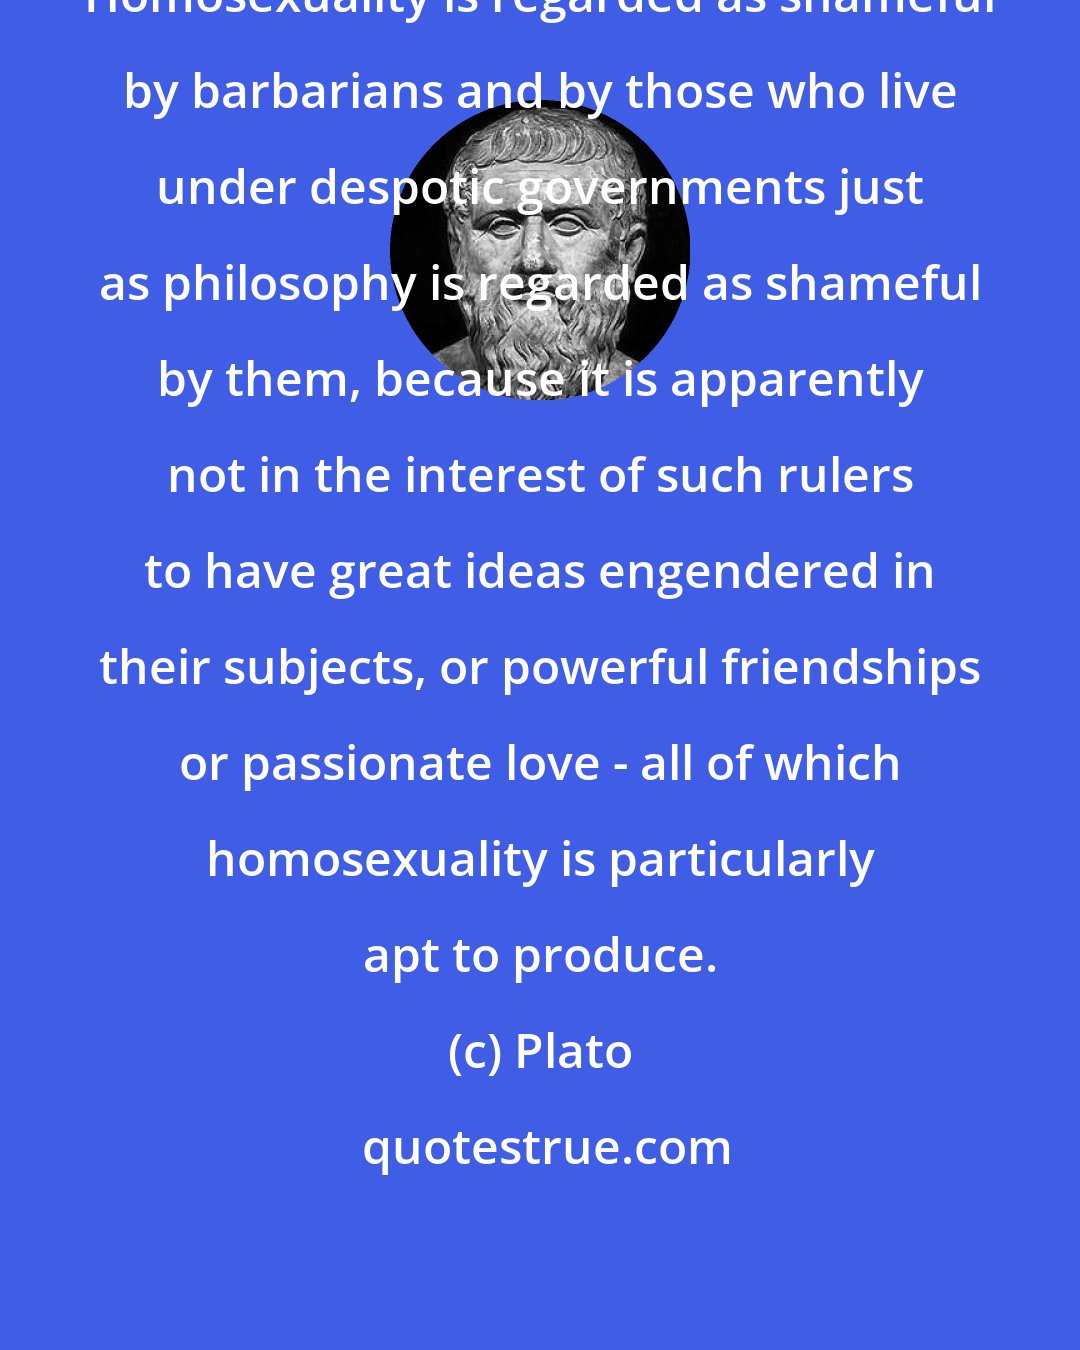 Plato: Homosexuality is regarded as shameful by barbarians and by those who live under despotic governments just as philosophy is regarded as shameful by them, because it is apparently not in the interest of such rulers to have great ideas engendered in their subjects, or powerful friendships or passionate love - all of which homosexuality is particularly apt to produce.